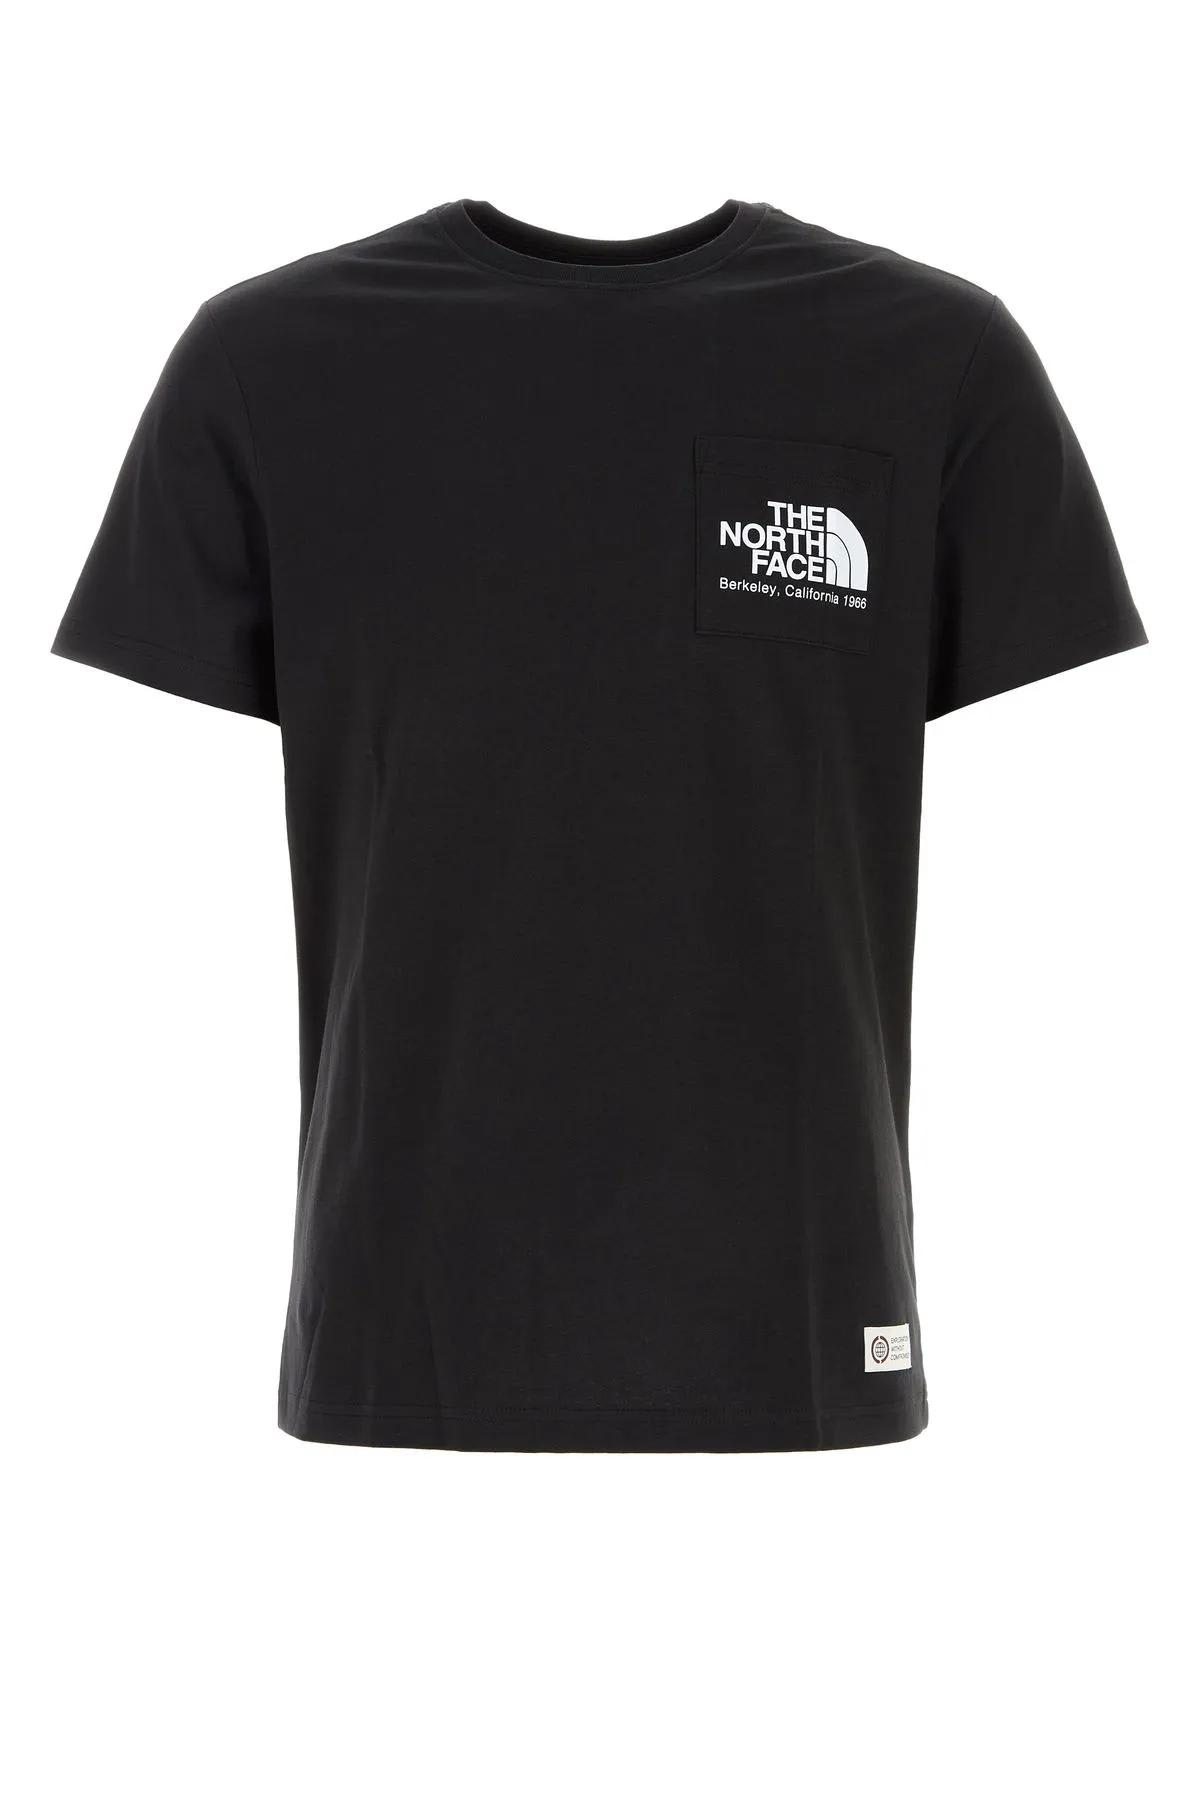 THE NORTH FACE BLACK COTTON T-SHIRT